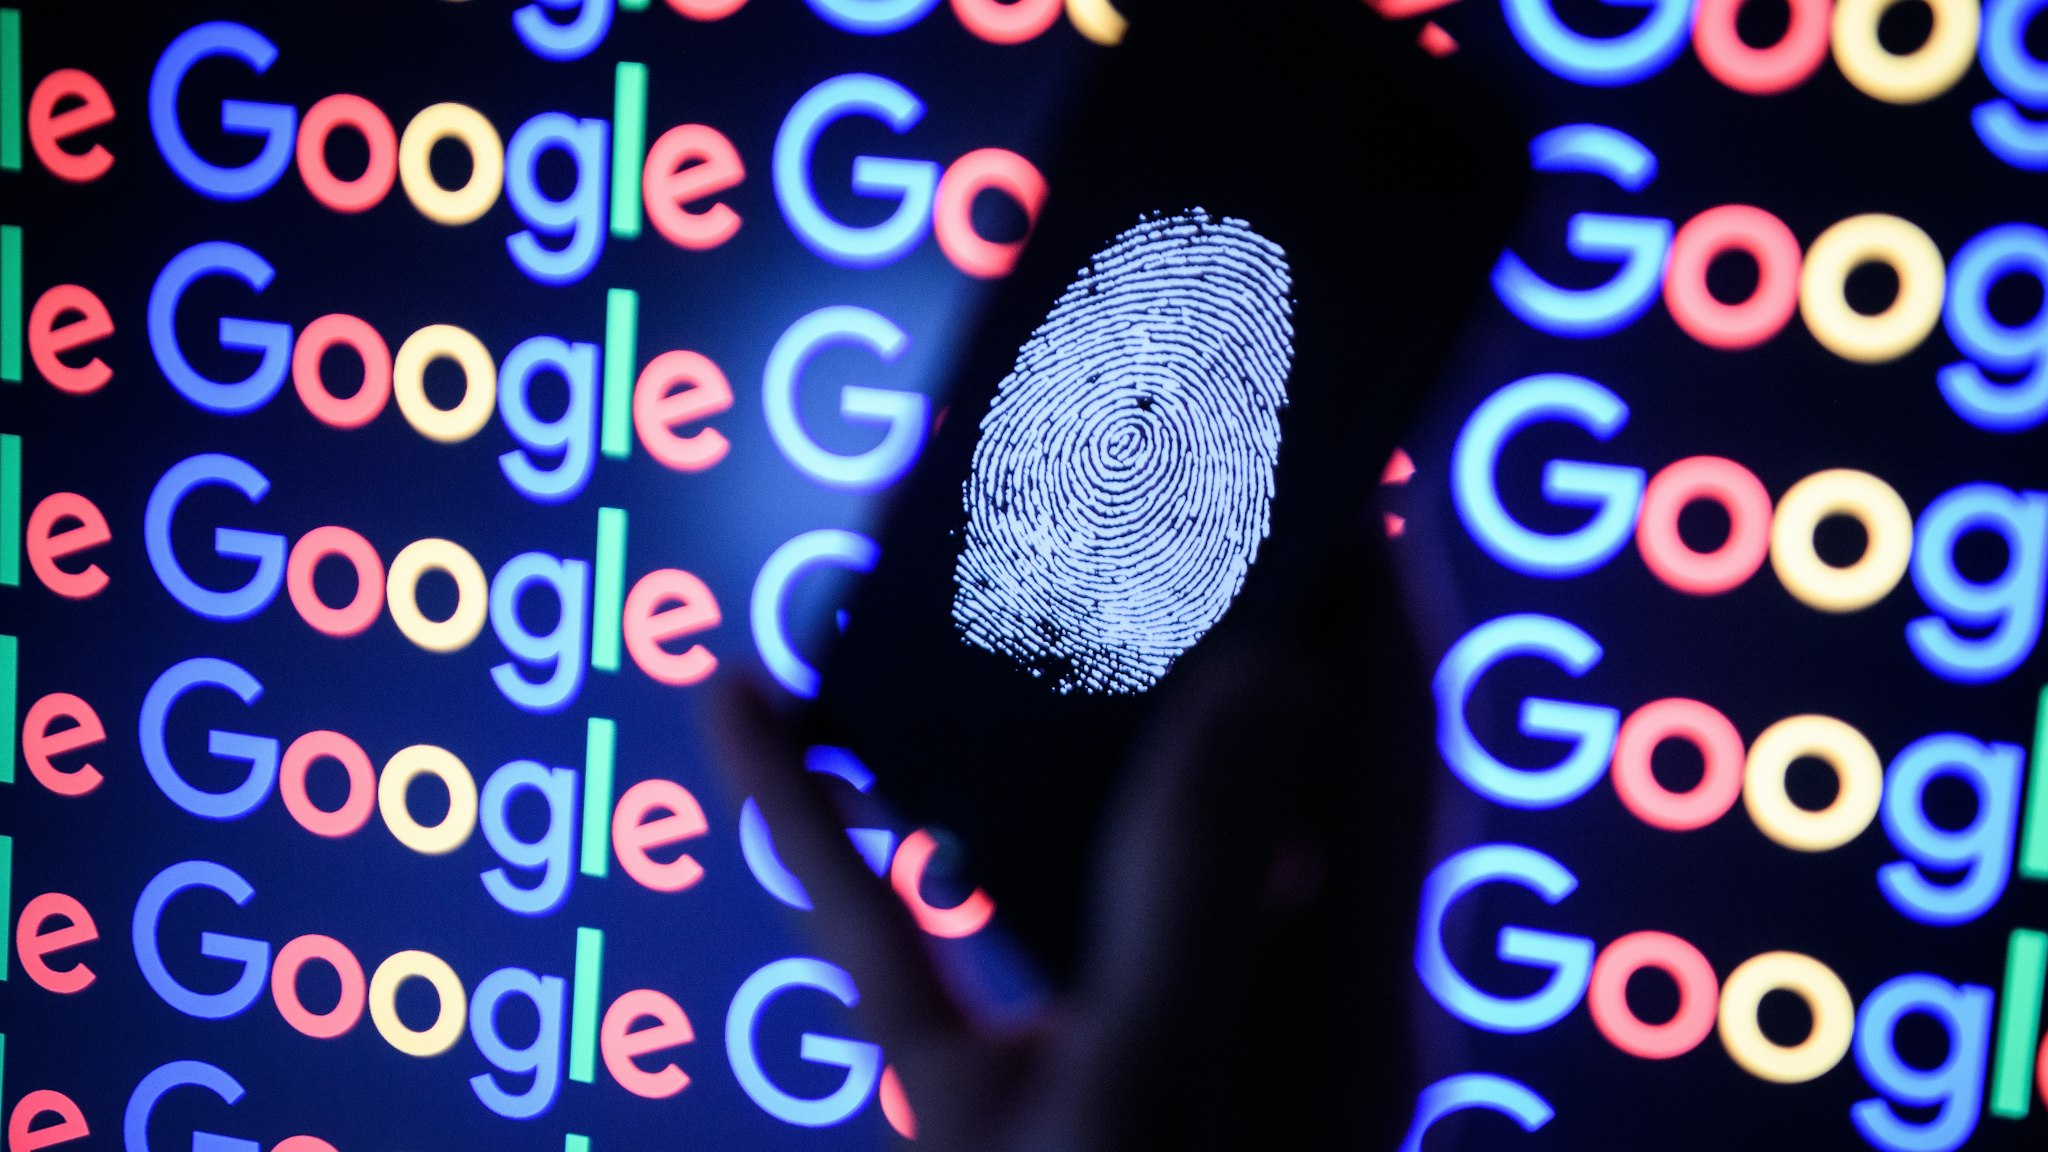 In this photo illustration, A thumbprint is displayed on a mobile phone while the Google logo is displayed on a computer monitor on August 09, 2017 in London, England. Founded in 1995 by Sergey Brin and Larry Page, Google now makes hundreds of products used by billions of people across the globe, from YouTube and Android to Smartbox and Google Search.